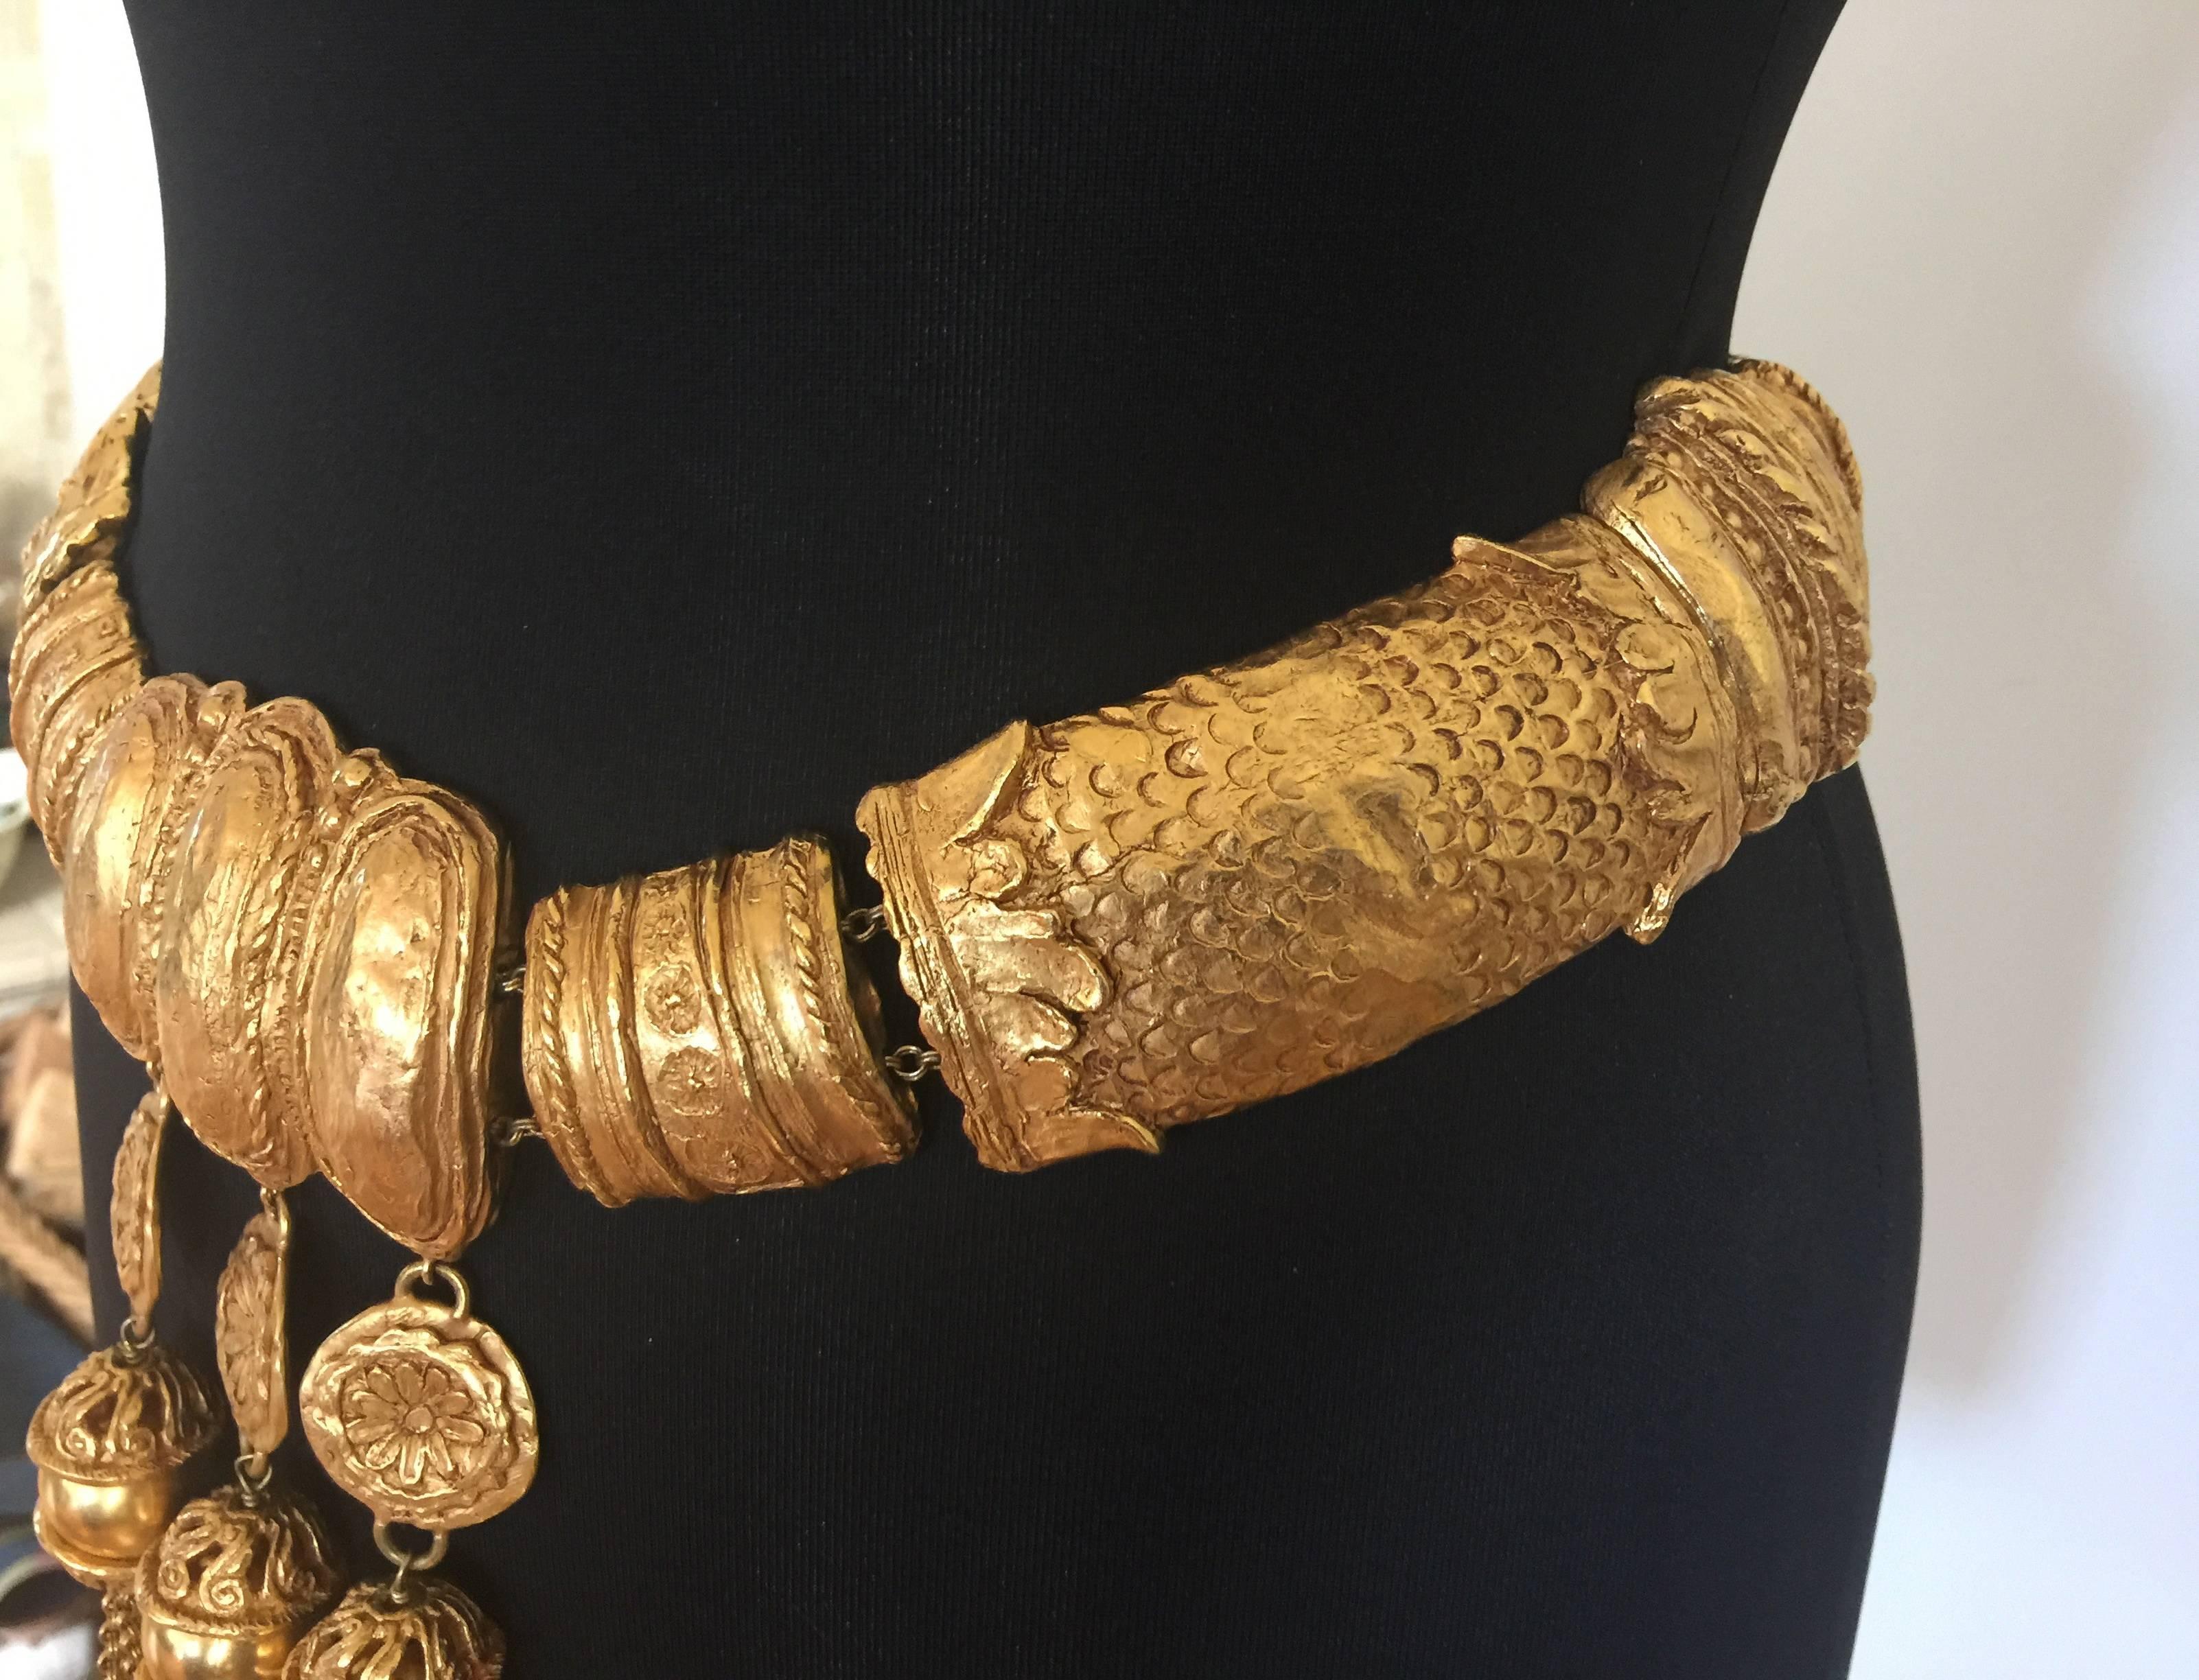 
This Lacroix Haute Couture treasure is just monumental! 

It weighs a ton!

Super chunky gilded cast metal panels are strung on chains and run all the way around the belt for maximum impact.

Striking tribal style design with amazingly long